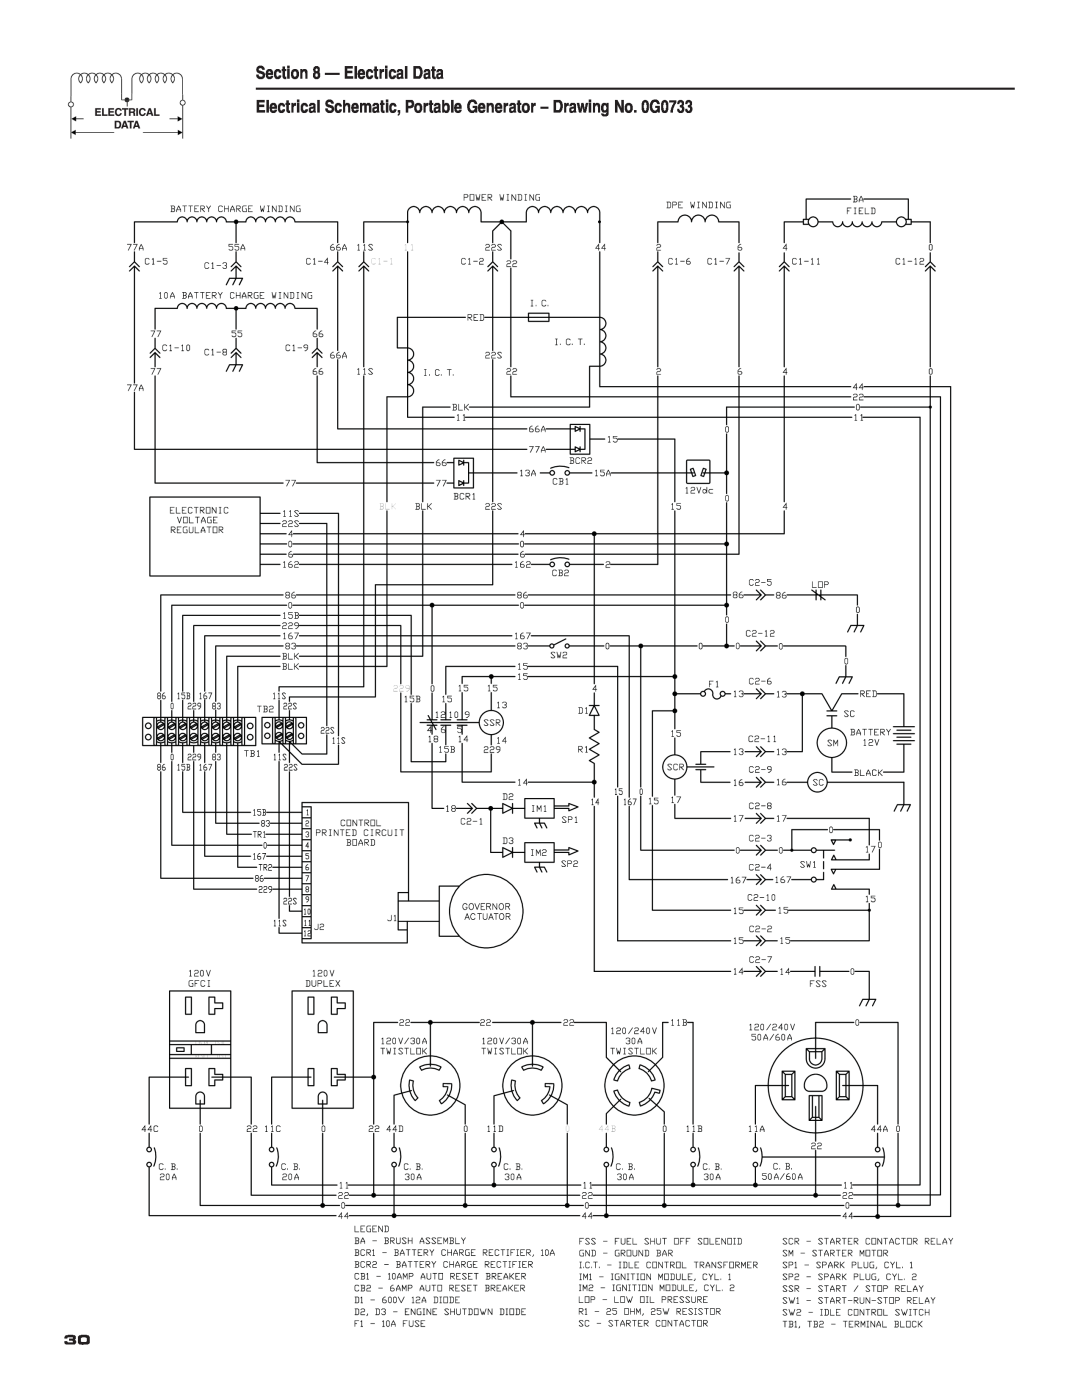 Guardian Technologies 004583-0 owner manual Electrical Data, Electrical Schematic, Portable Generator - Drawing No. 0G0733 